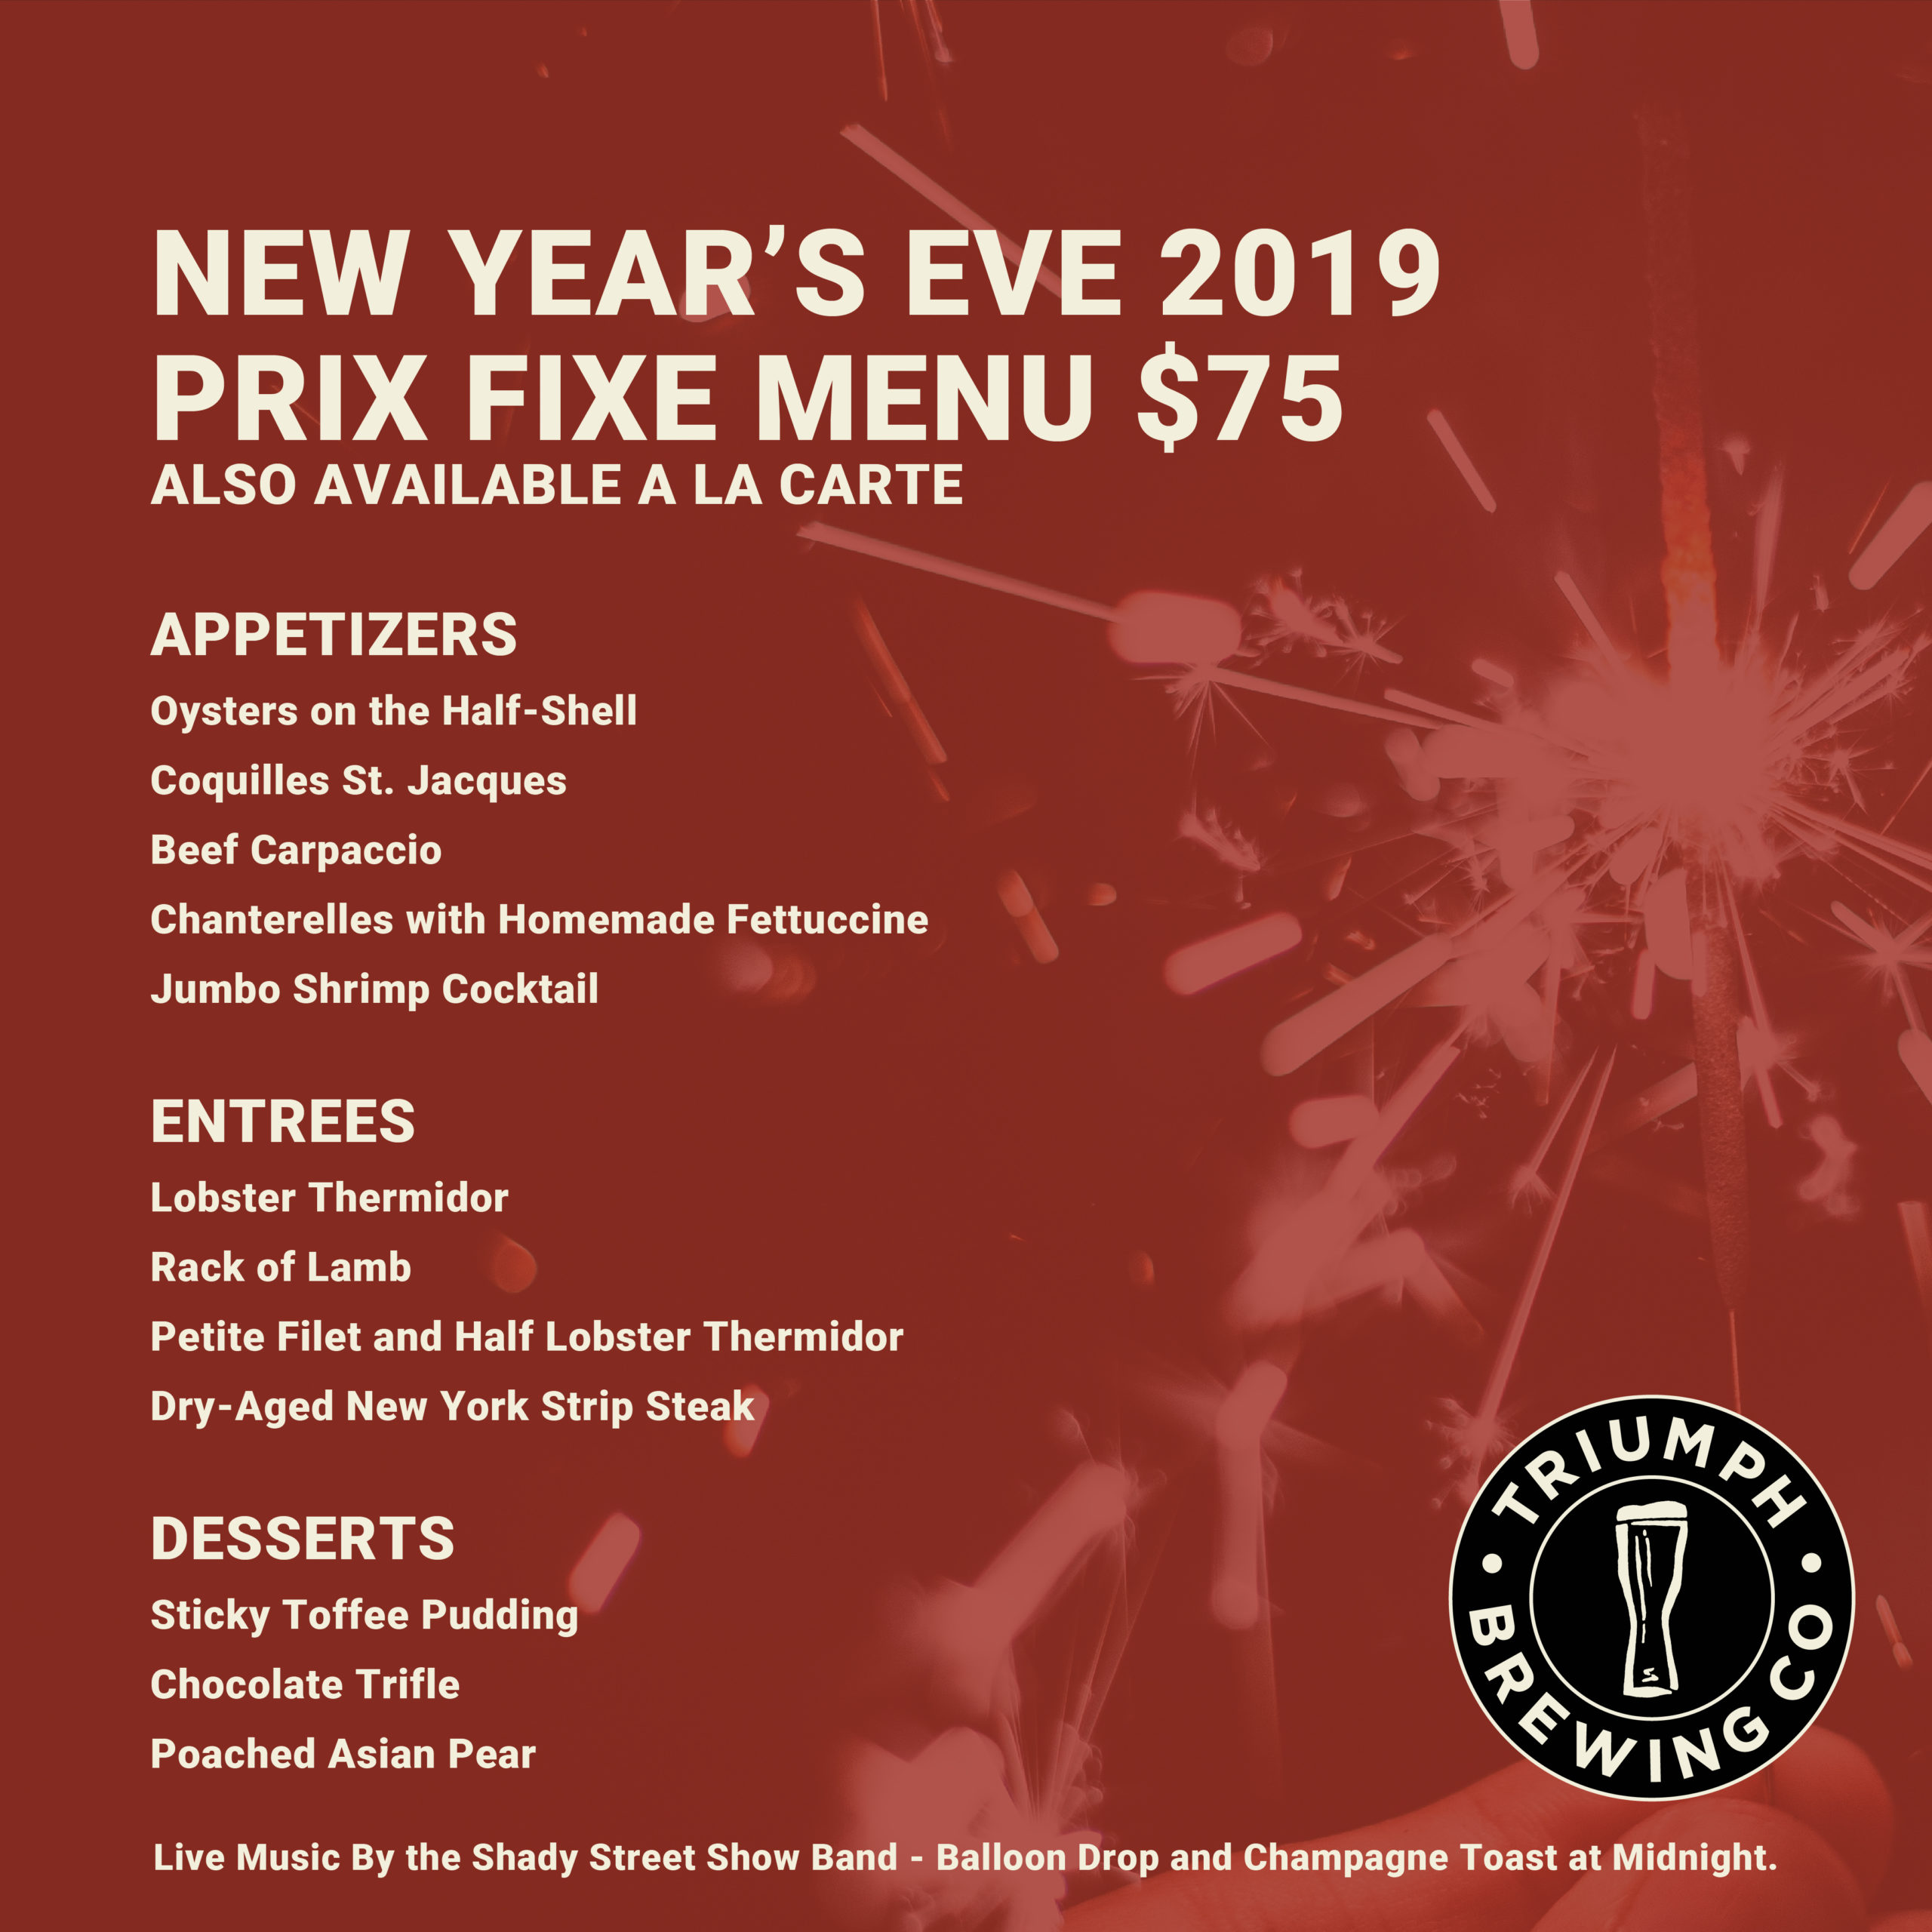 New Year's Eve 2019 at Triumph Red Bank